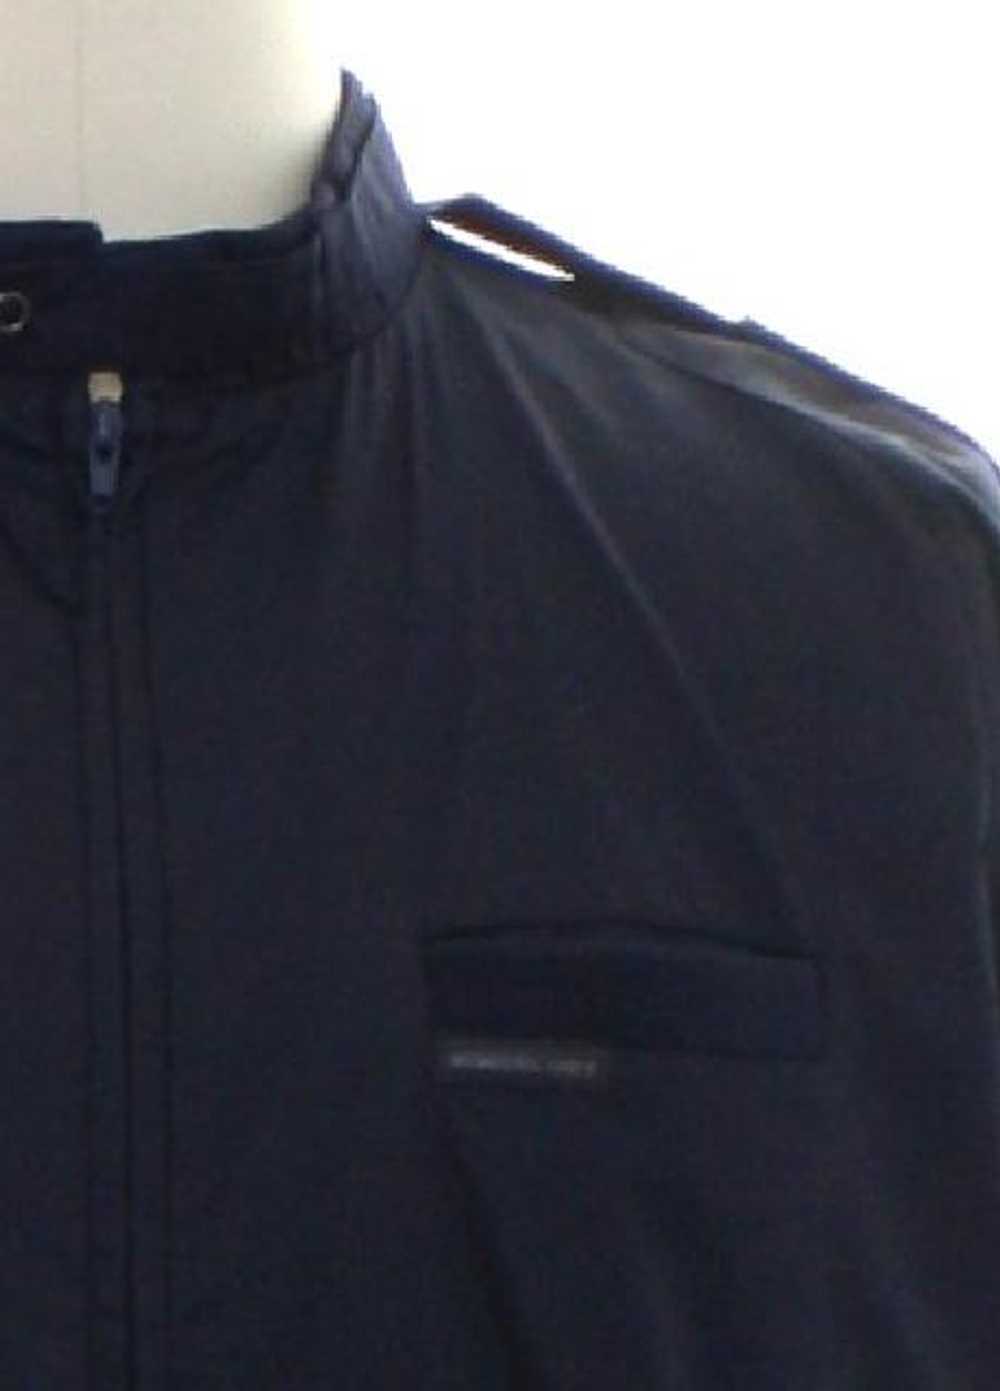 1980's Members Only Mens Members Only Jacket - image 2